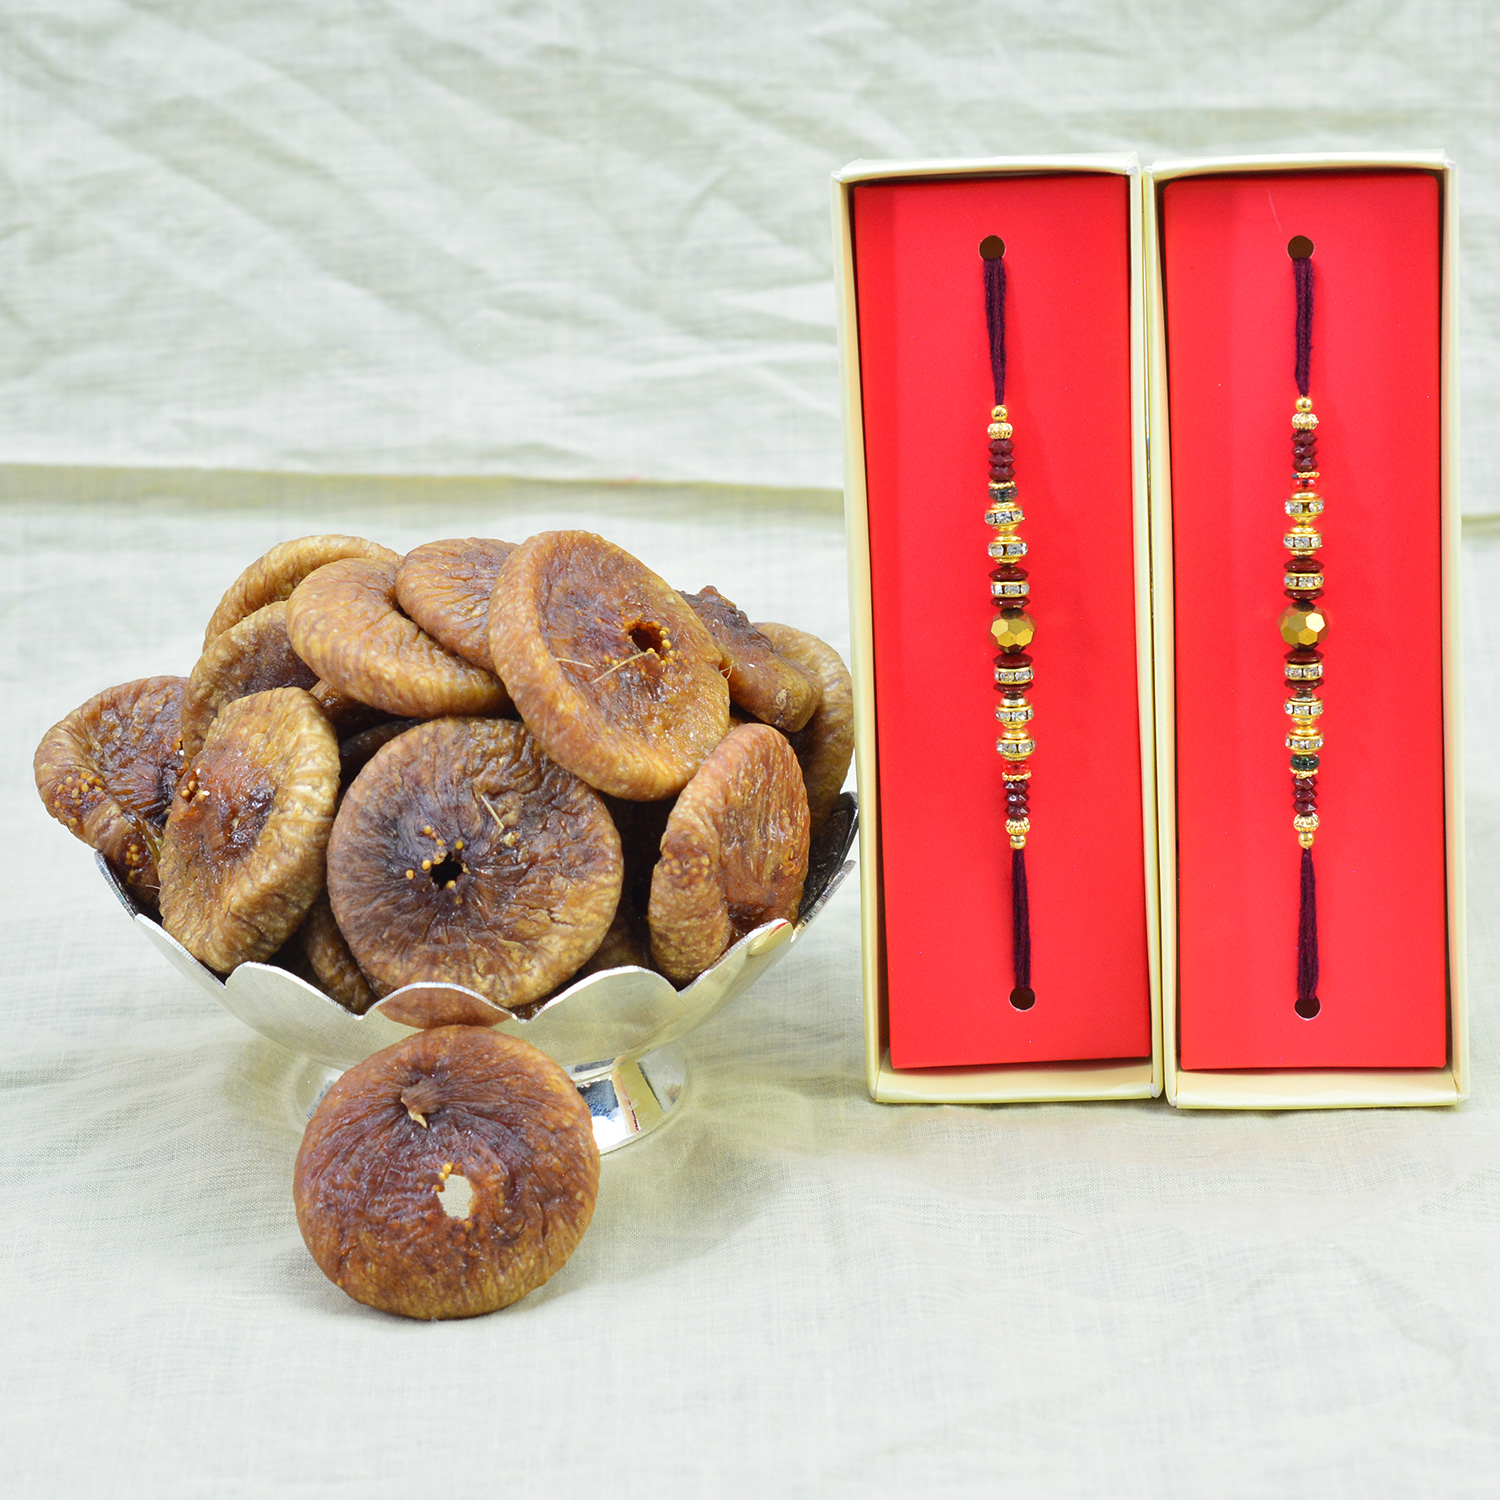 Amazing Looking Glasses Tread 2 Brother Rakhis with Anjeer Dry Fruit